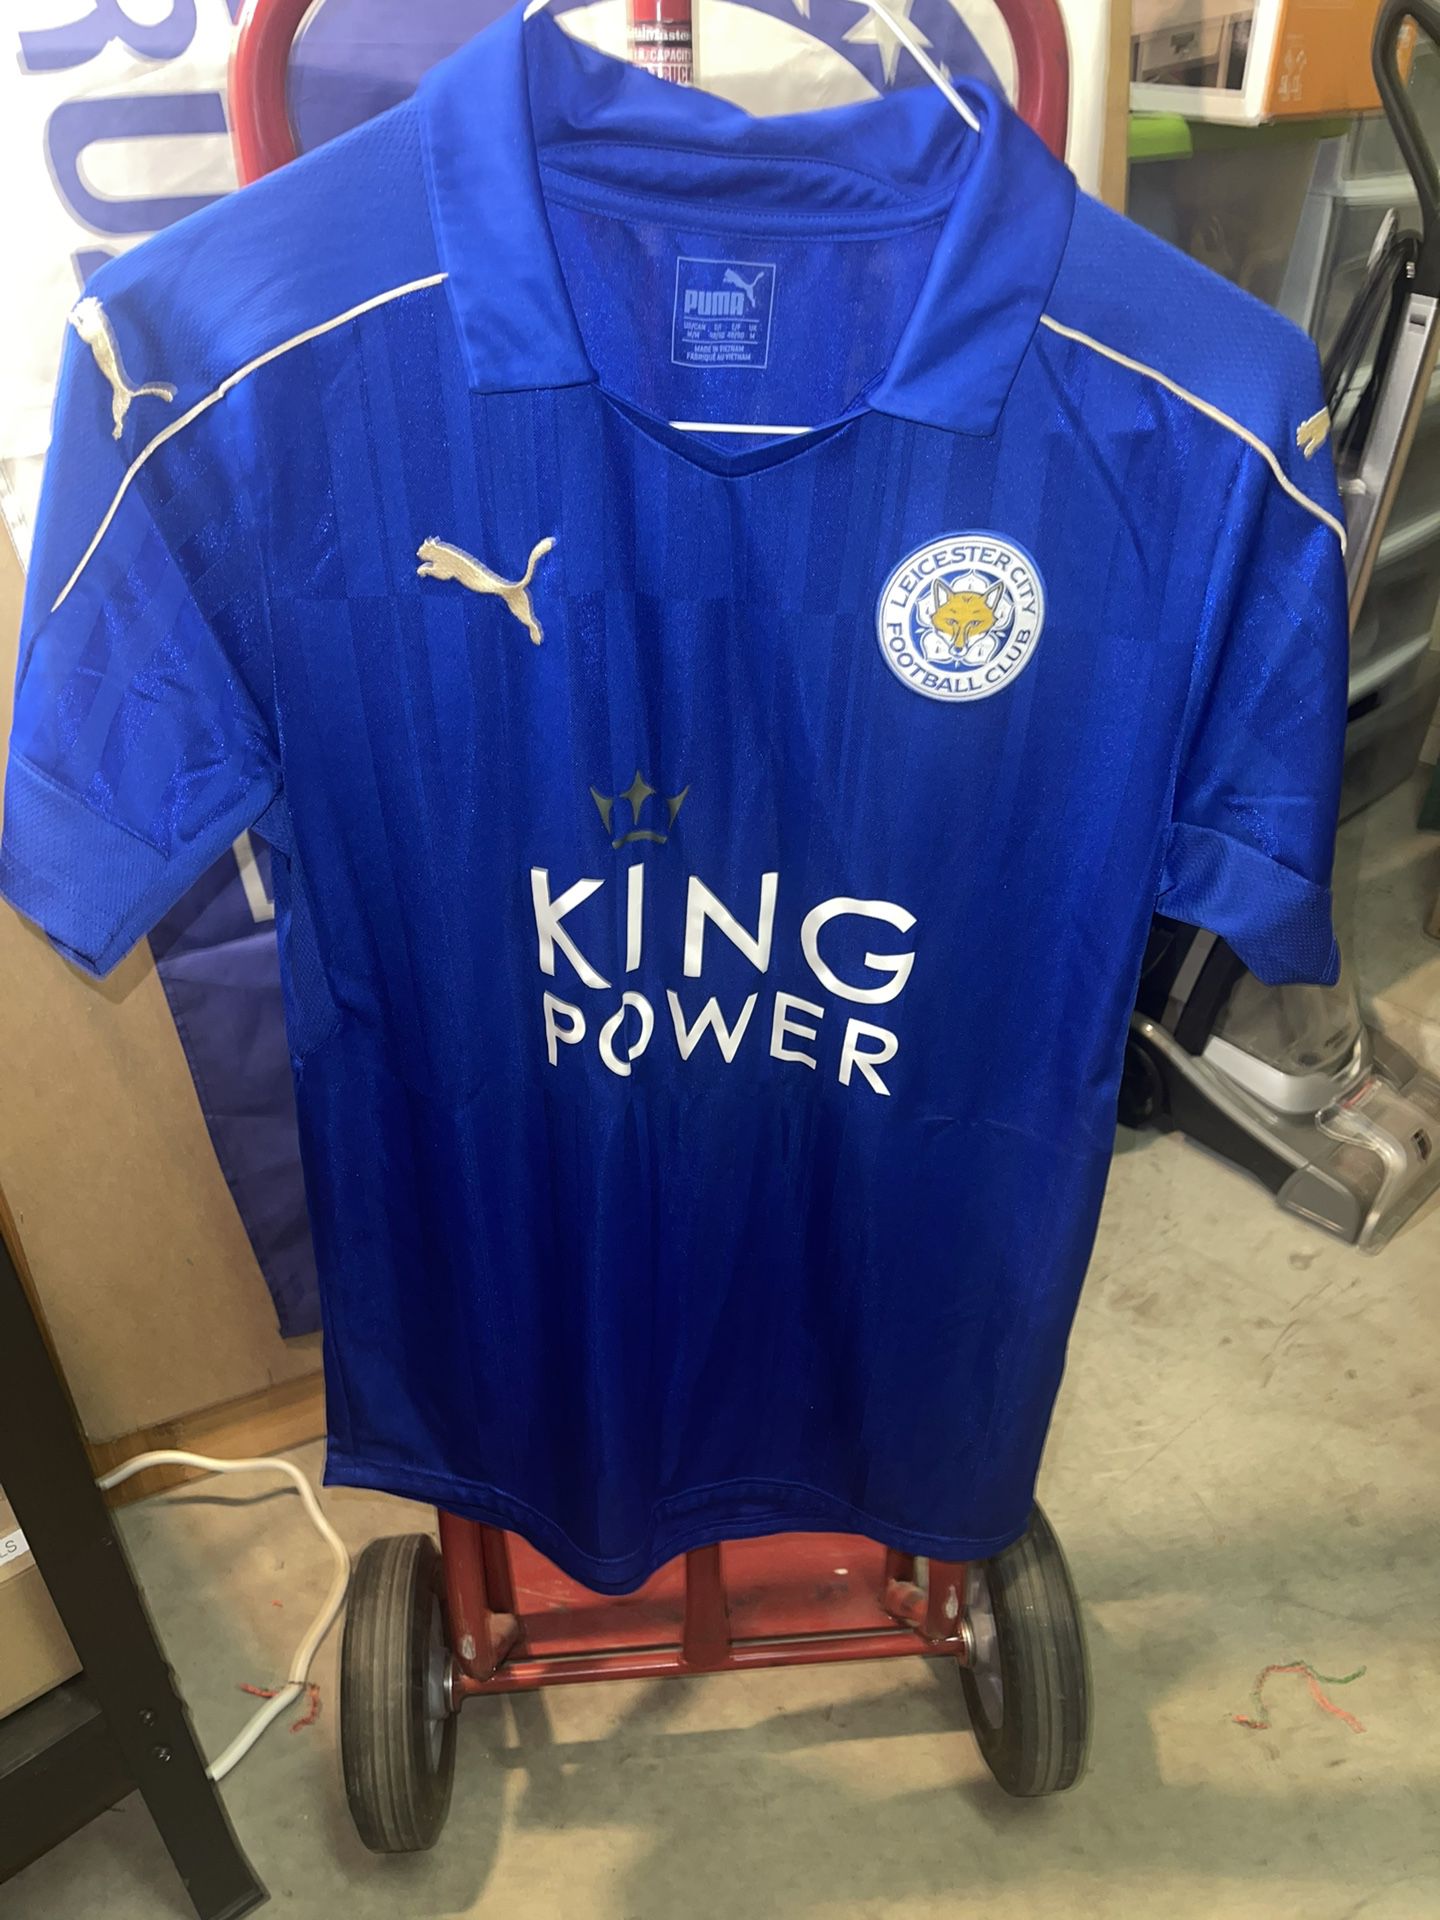 Leicester City Jersey 